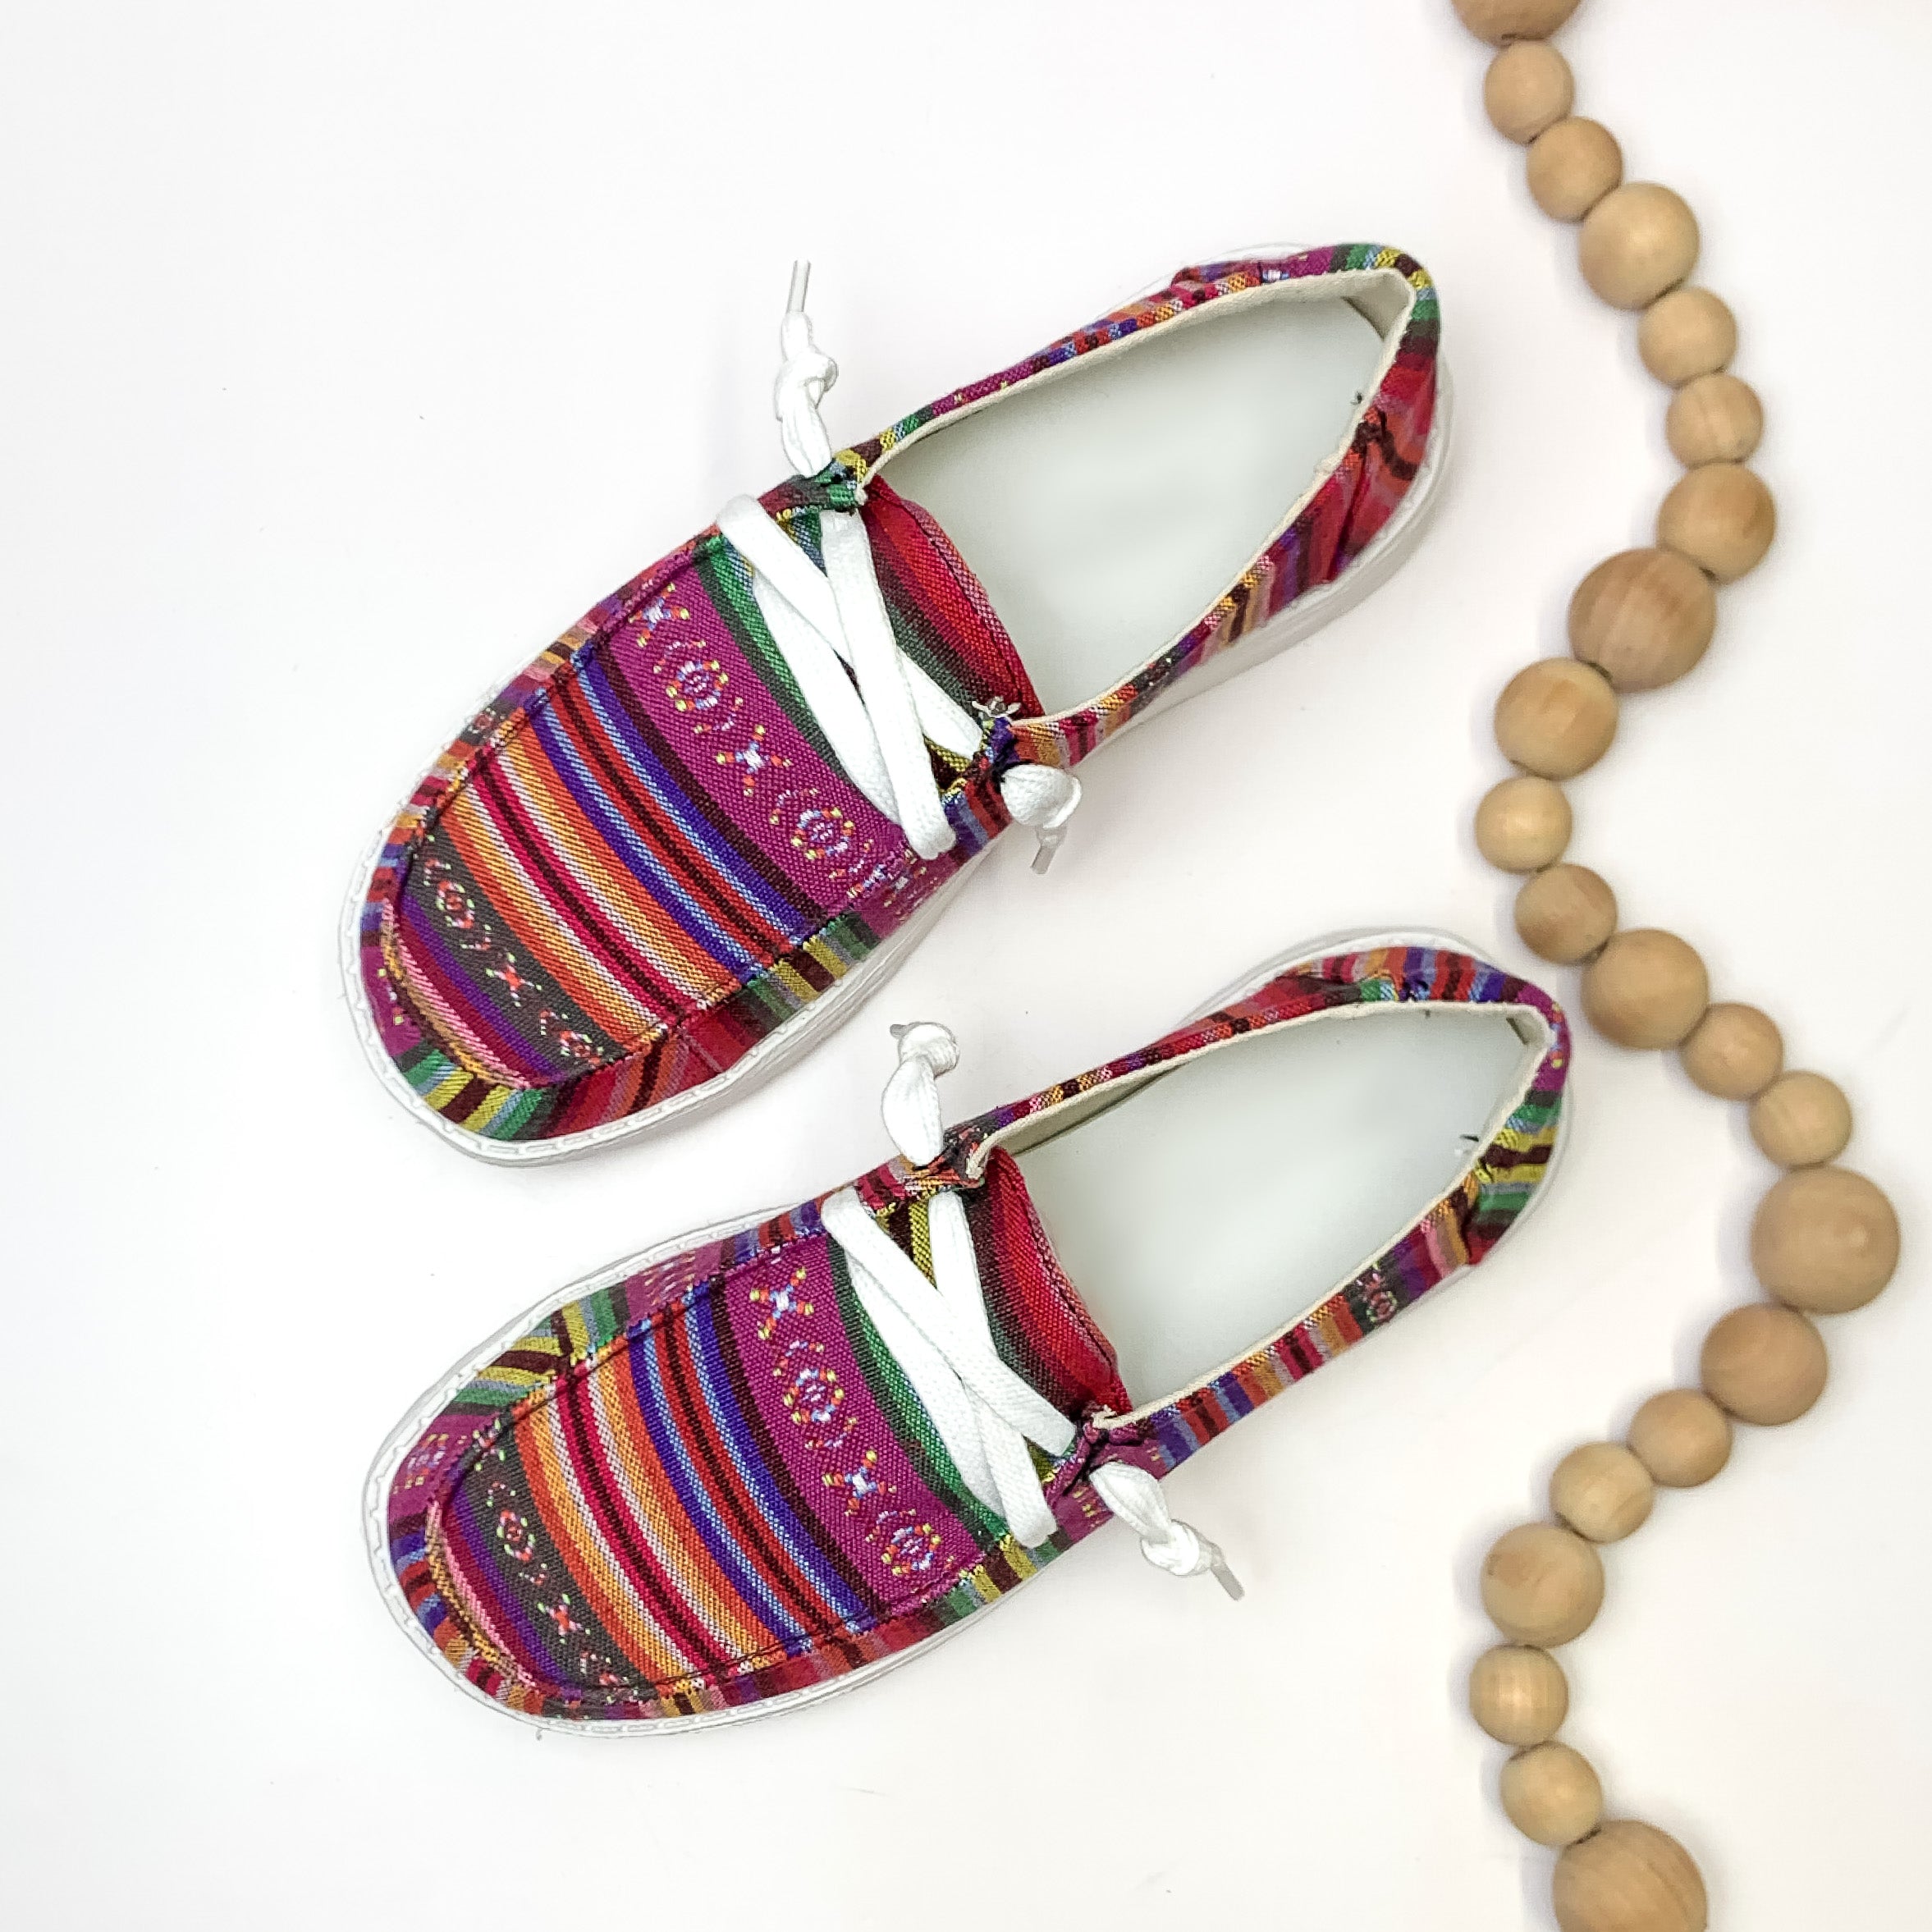 Very G | Have To Run Slip On Serape Print Loafers with Laces in Fuchsia Pink Multi - Giddy Up Glamour Boutique